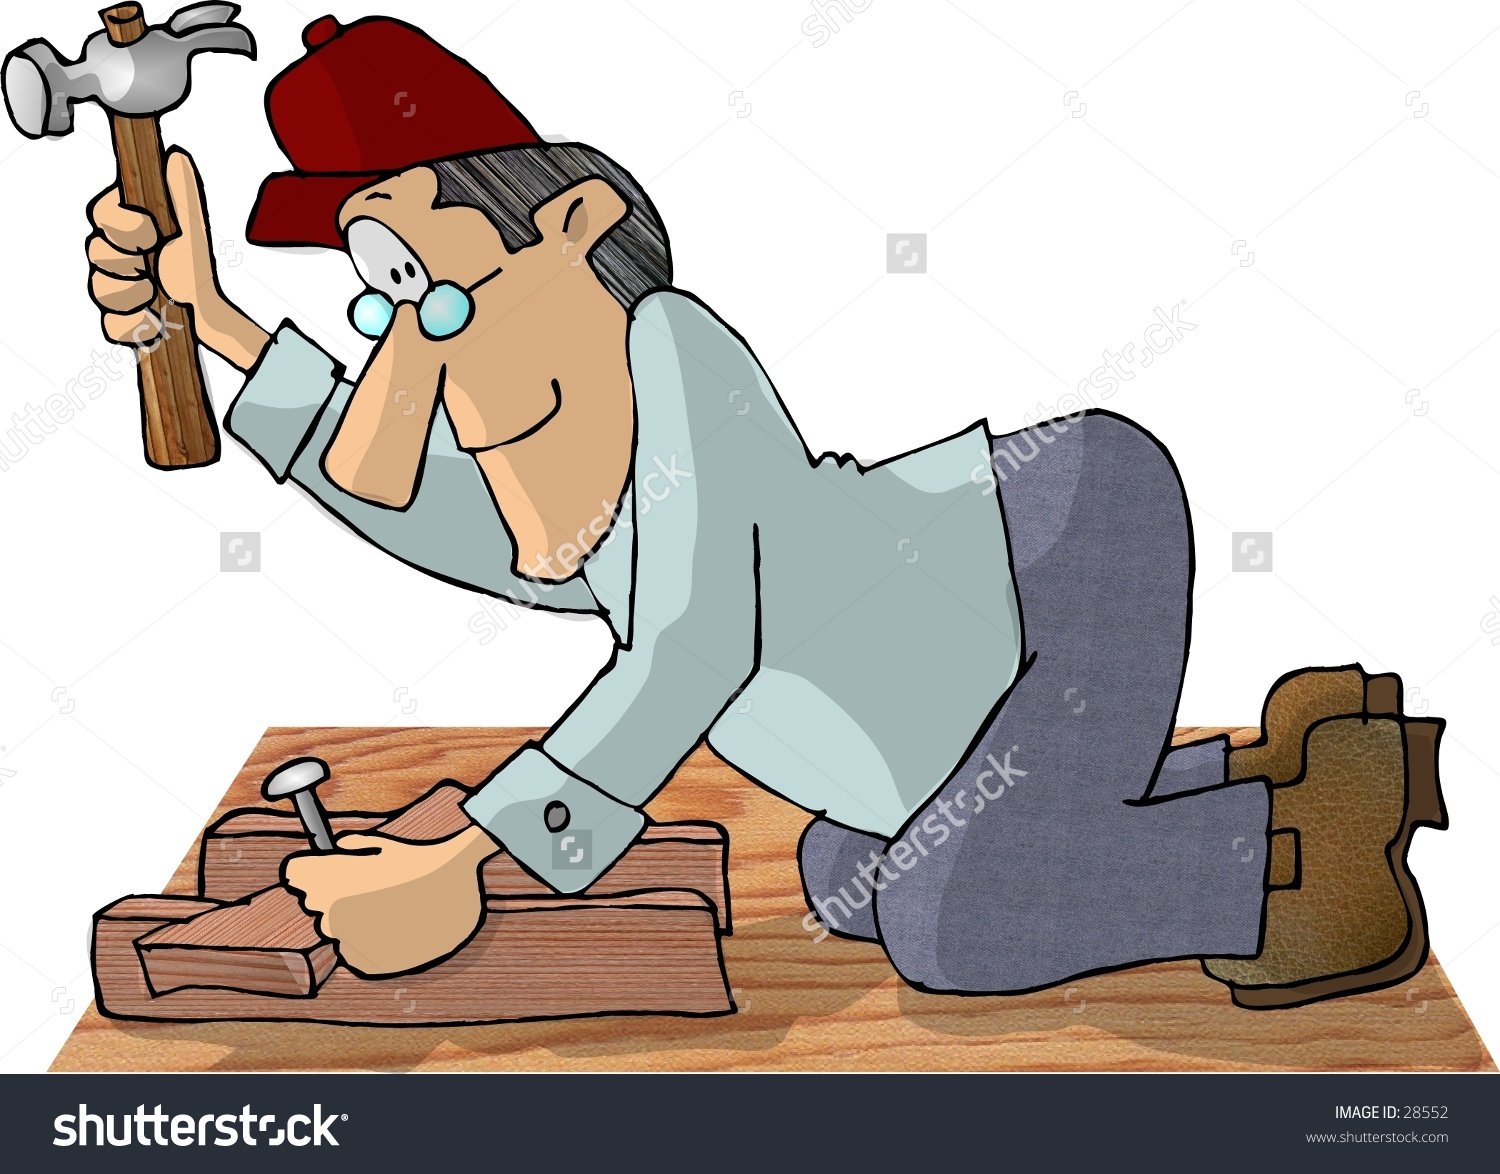 Hammering a Nail Clip Art - wide 2